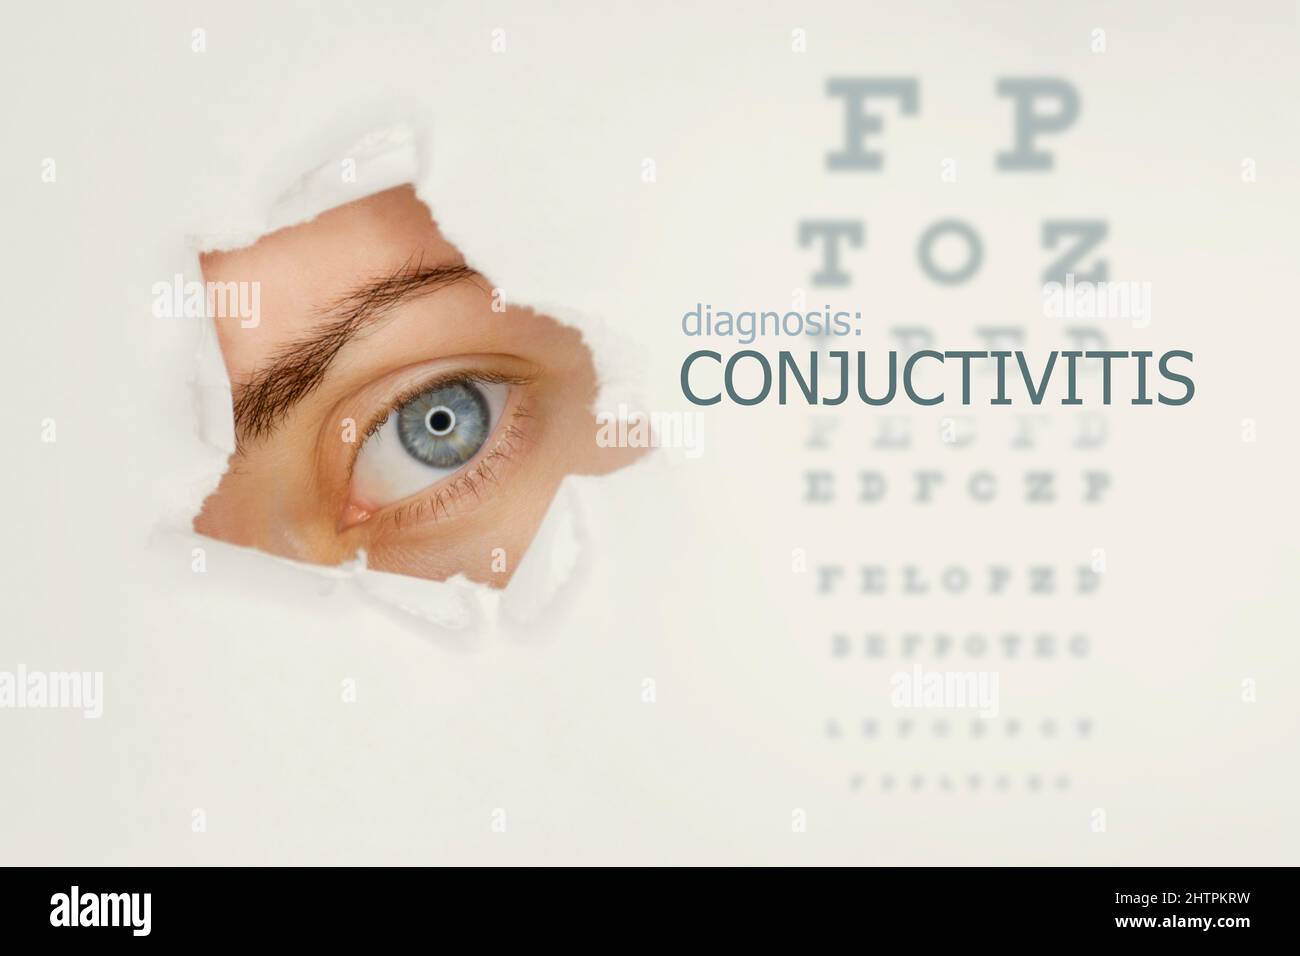 Conjuctivitis disease poster with eye test chart and blue eye on right. Studio grey background Stock Photo